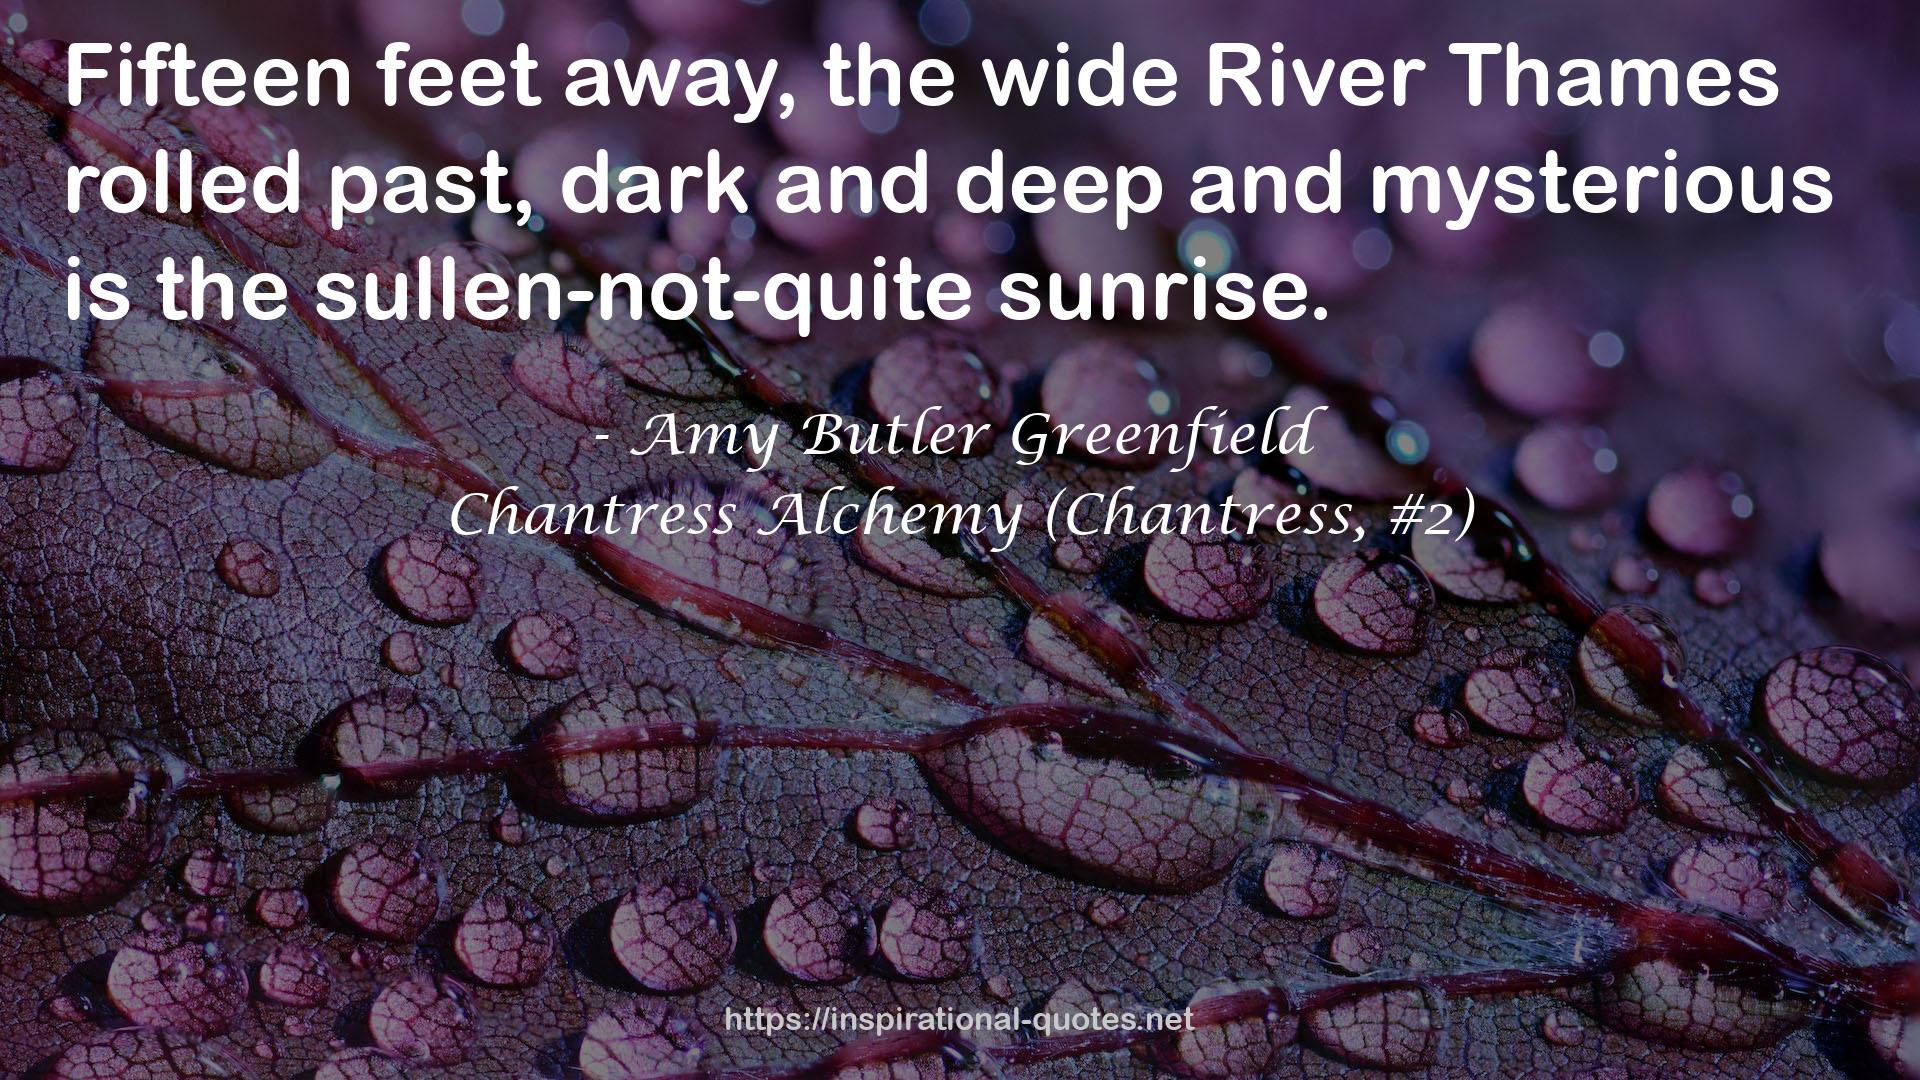 Amy Butler Greenfield QUOTES